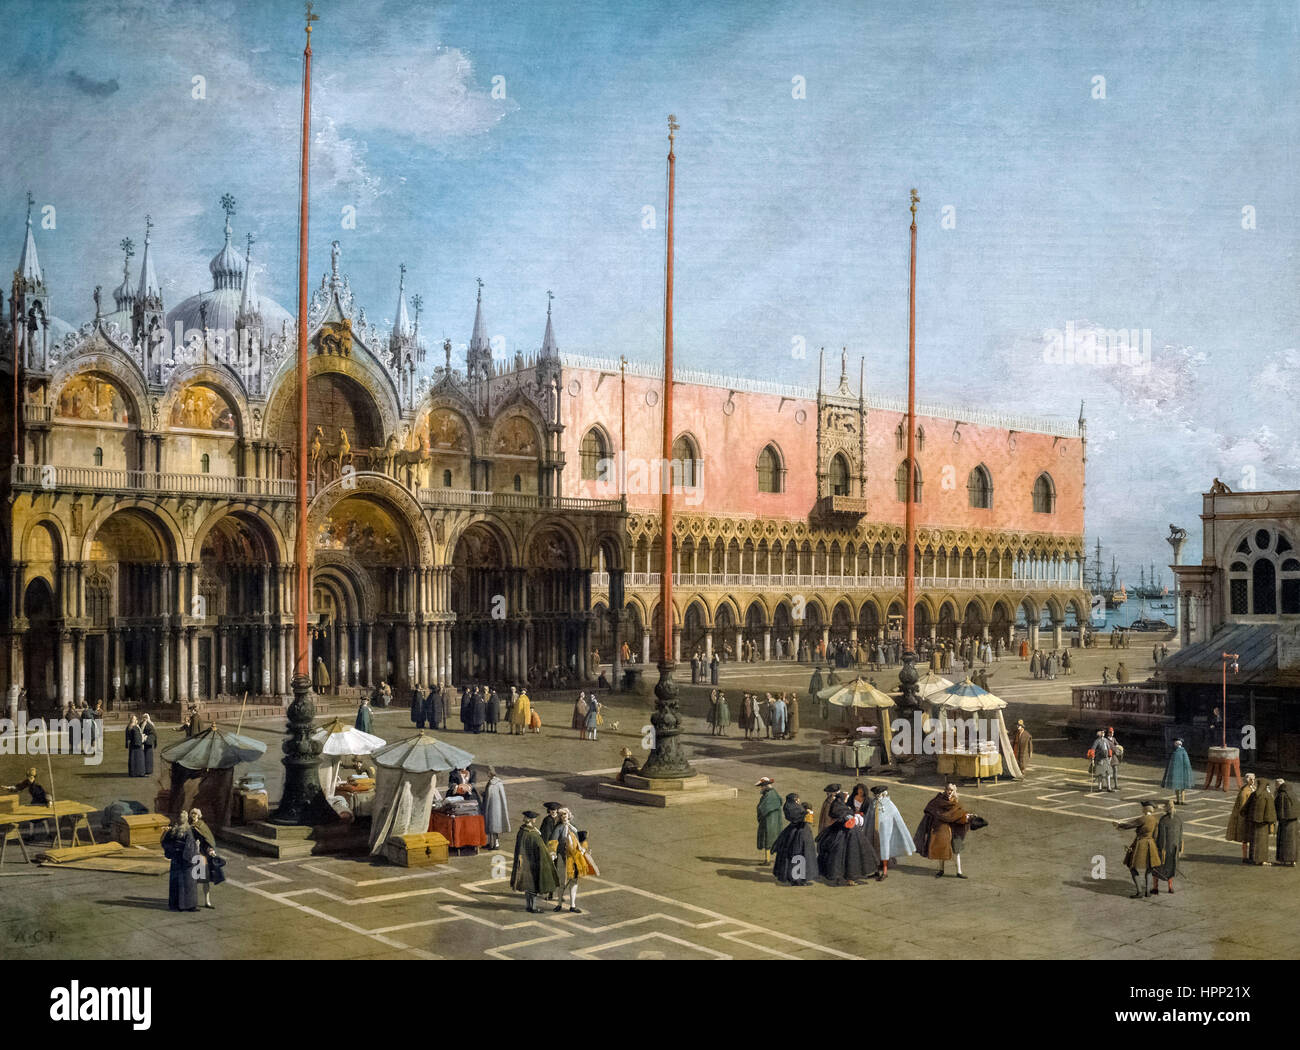 Canaletto painting. St Mark's Square, Venice (Piazza San Marco, Venezia) by Canaletto (1697-1768), oil on canvas, c.1742-44 Stock Photo